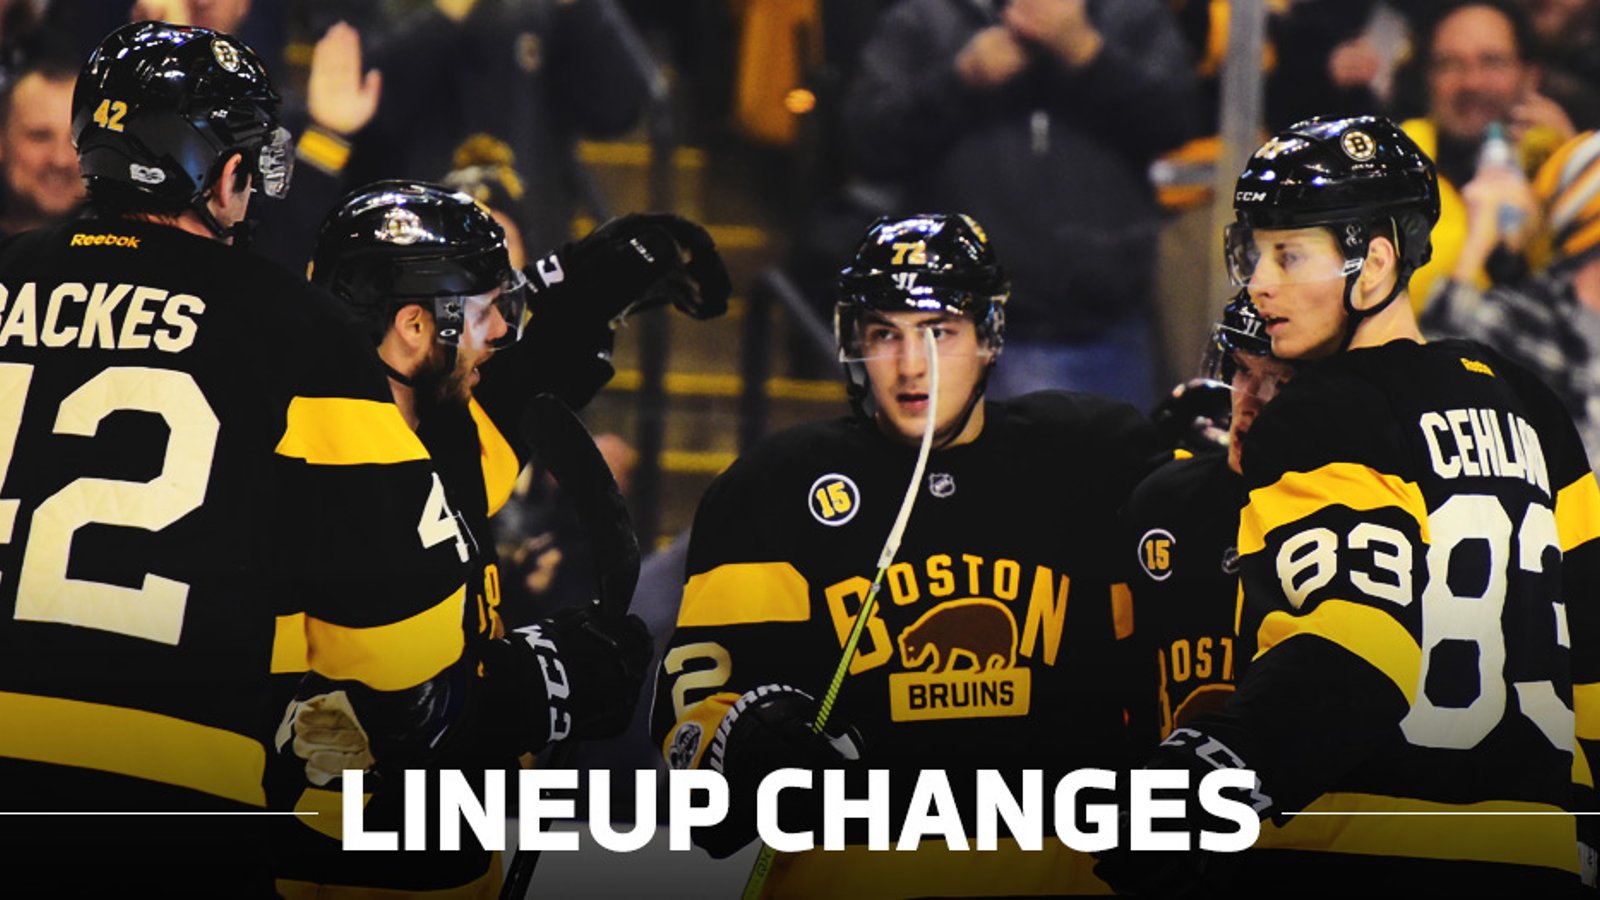 Lineup Changes: Cassidy has yet again shuffled the lines for the Bruins